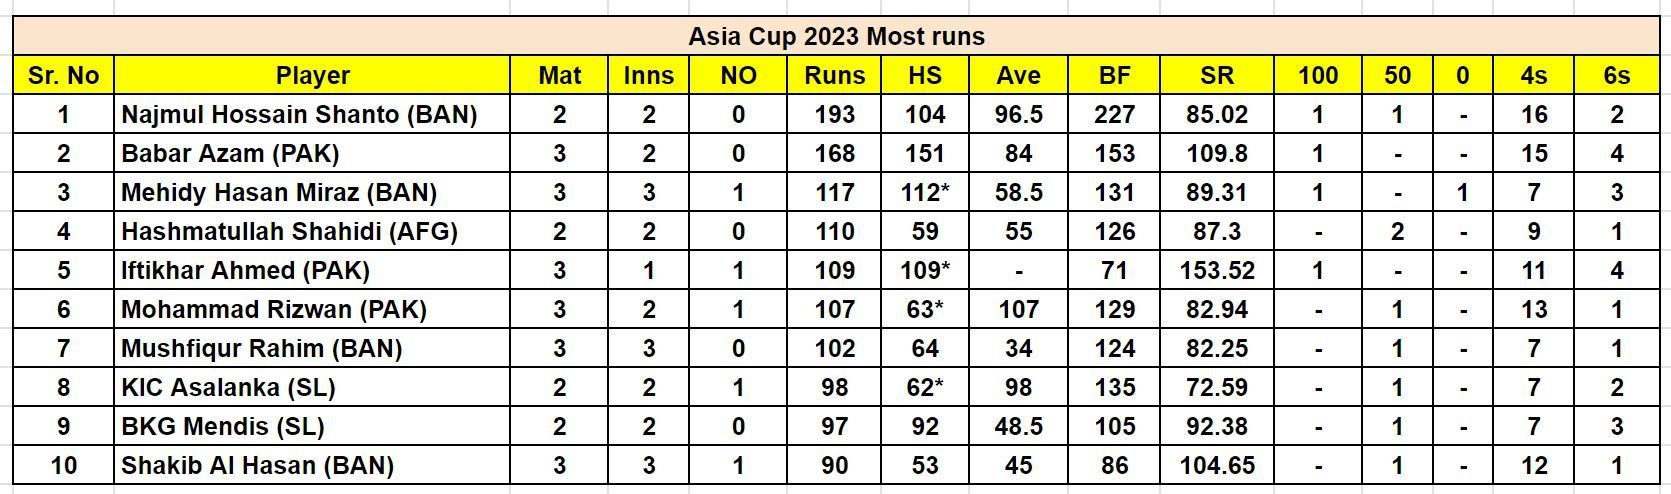 Asia Cup 2023 Most Runs